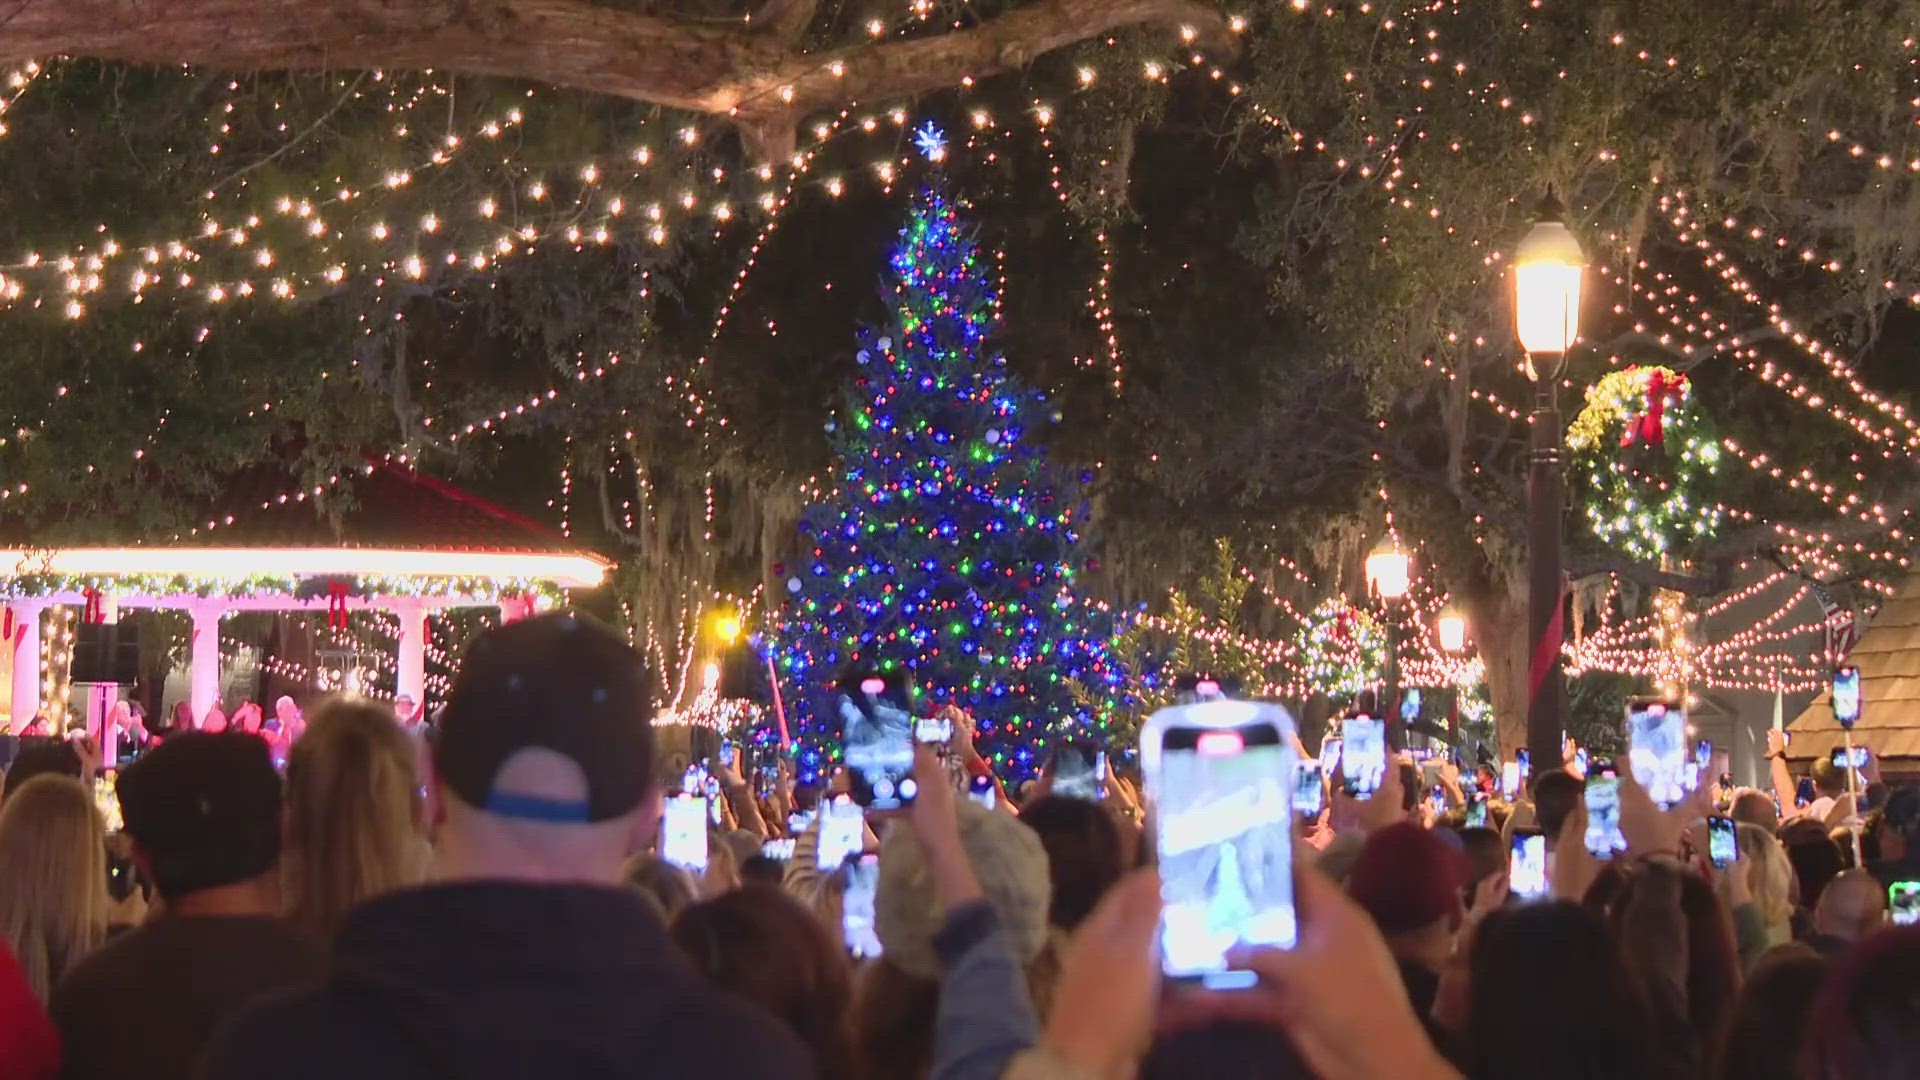 More than three million lights will light up Downtown St. Augustine every night throughout the holiday season.